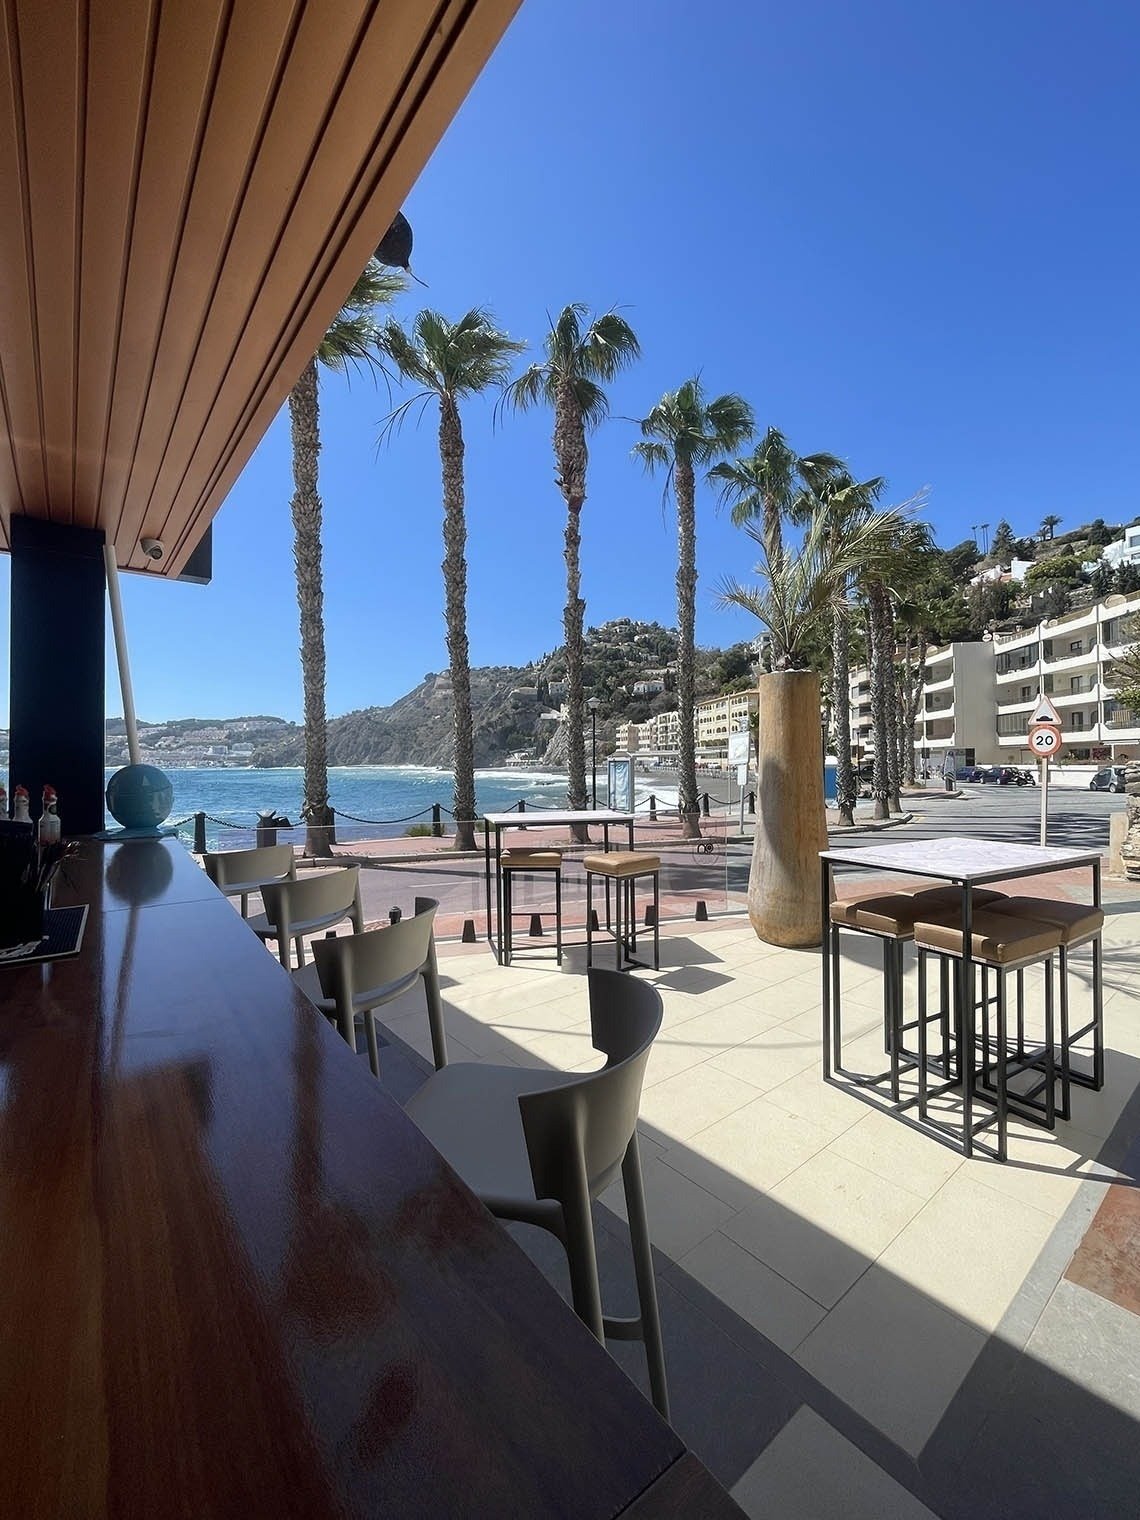 a view of the ocean from a restaurant with tables and chairs